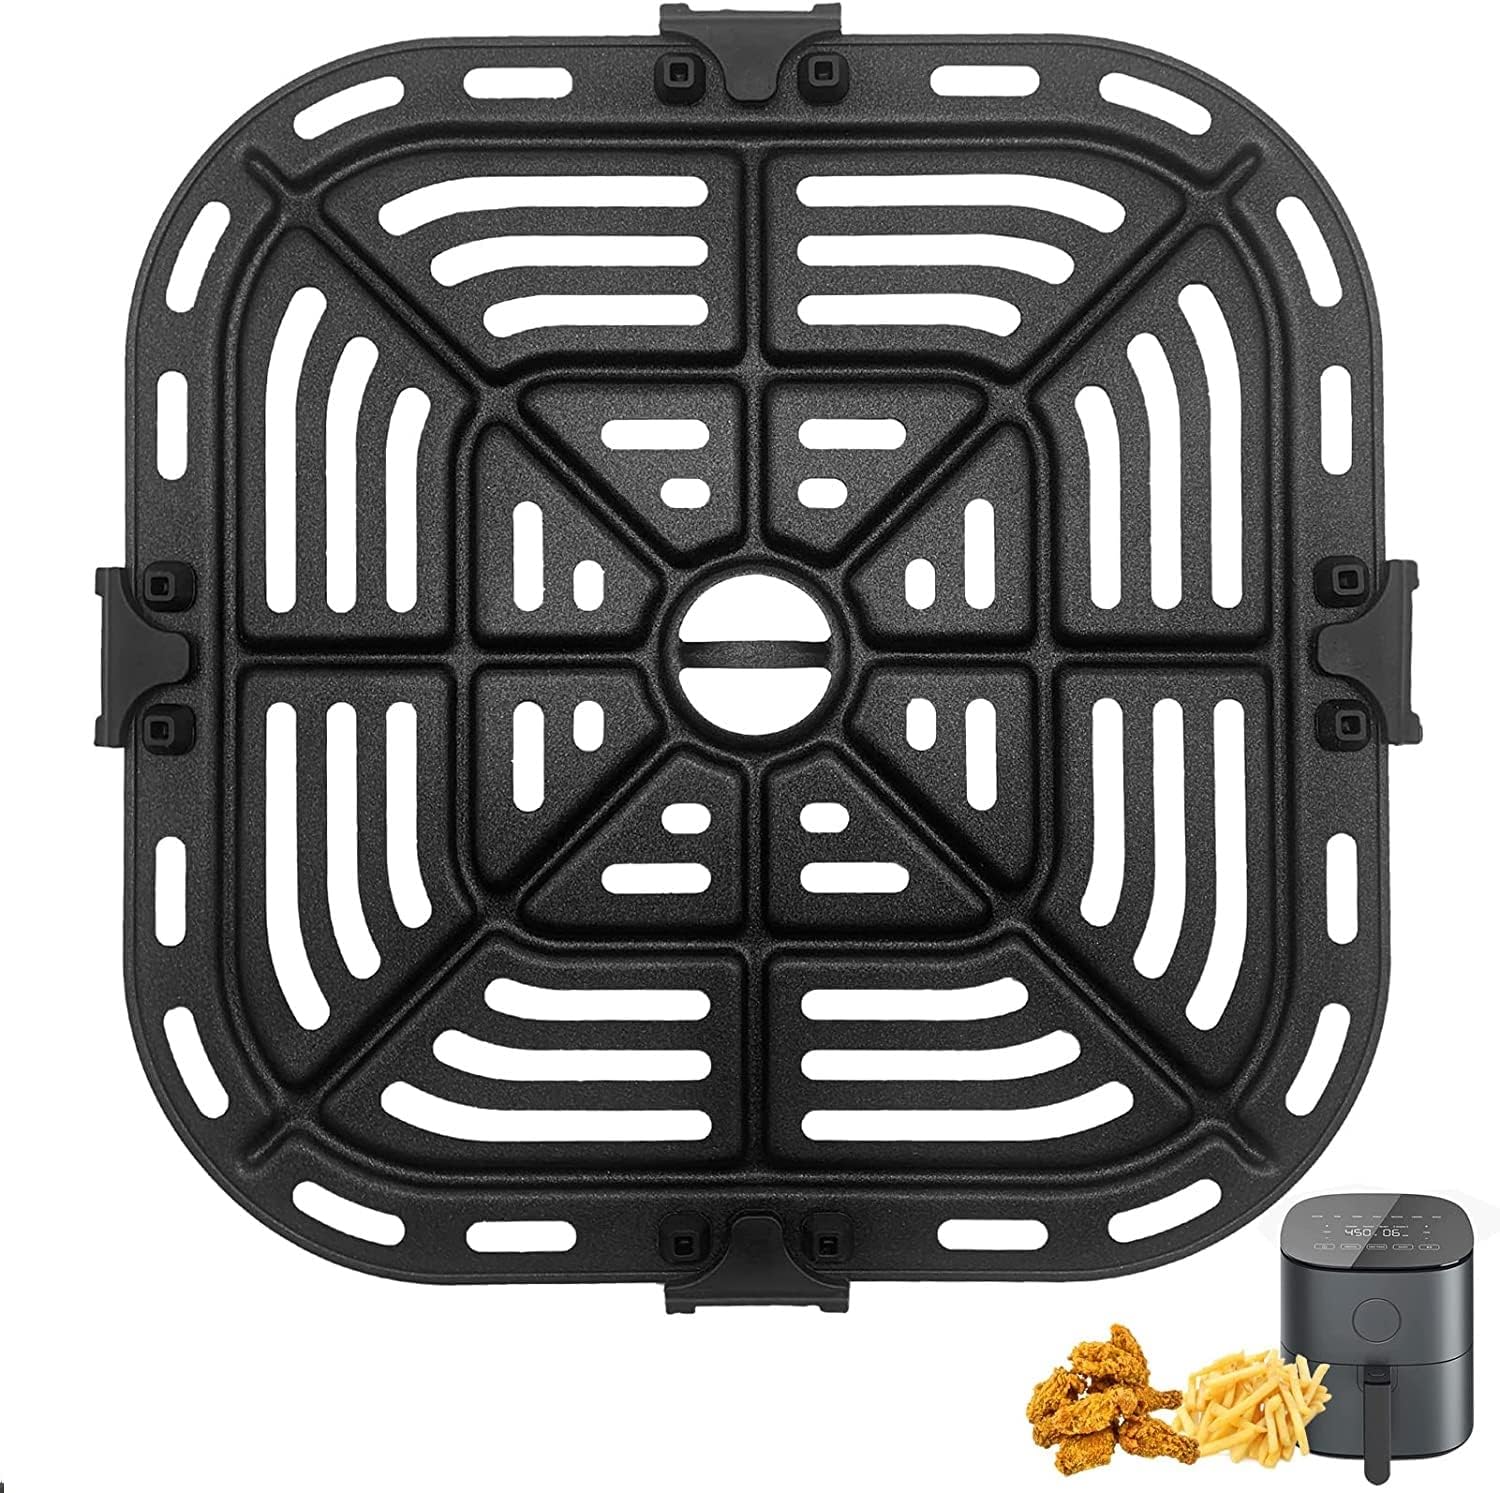 ALJ Air Fryer Tray for Ninja 4QT Air Fryers with Rubber Bumpers, 8.2 inch  Upgraded Round Grill Pan Plate, Crisper Plate Replacement Parts for Ninja